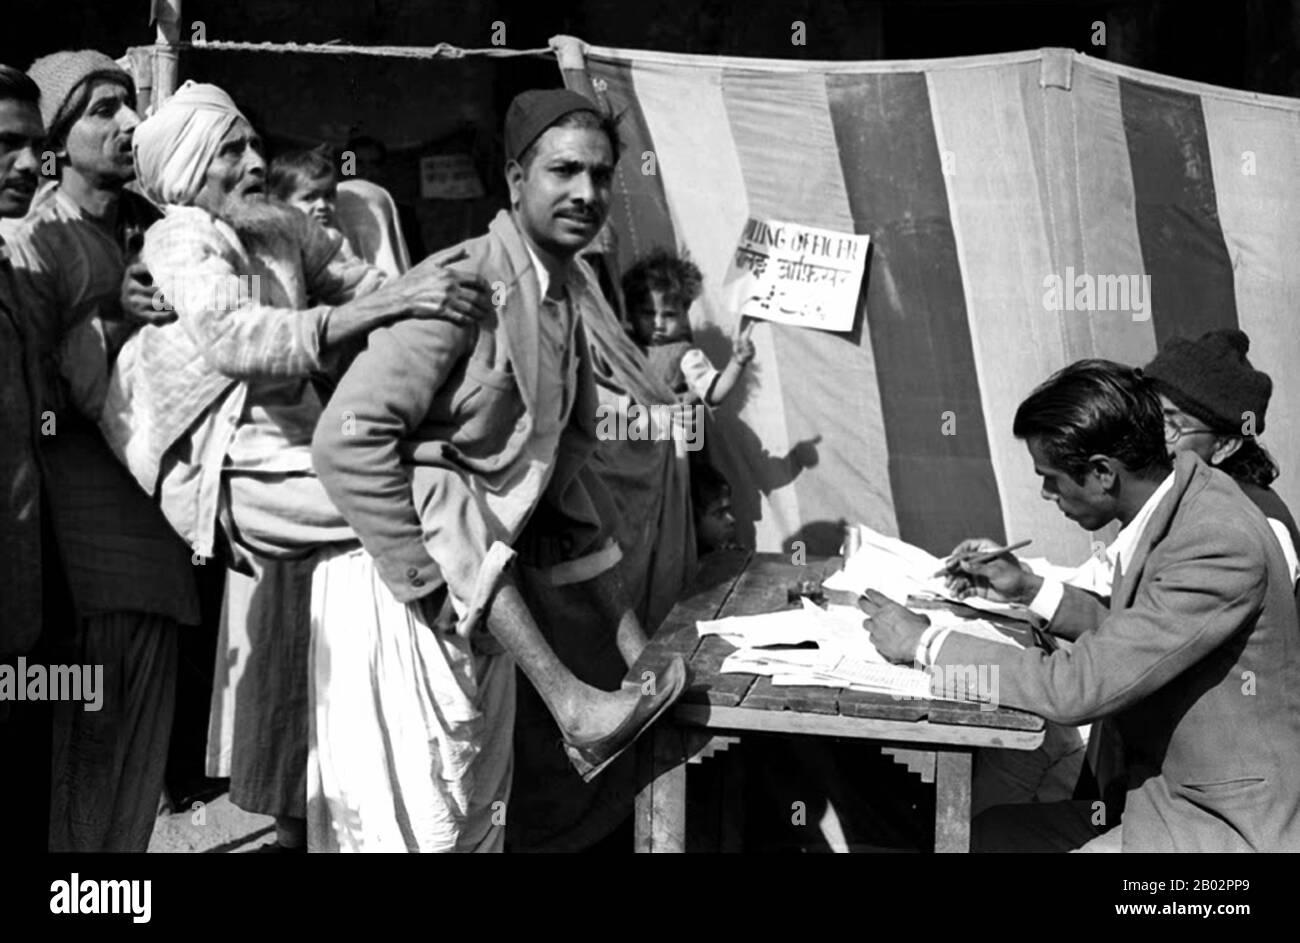 The Indian general election of 1951–52 elected the first Lok Sabha since India became independent in August 1947. Until this point, the Indian Constituent Assembly had served as an interim legislature.  The Indian National Congress (INC) won a landslide victory, winning 364 of the 489 seats and 45% of the total votes polled. This was over four times as many votes as the second-largest party. Jawaharlal Nehru became the first democratically elected Prime Minister of the country. Stock Photo